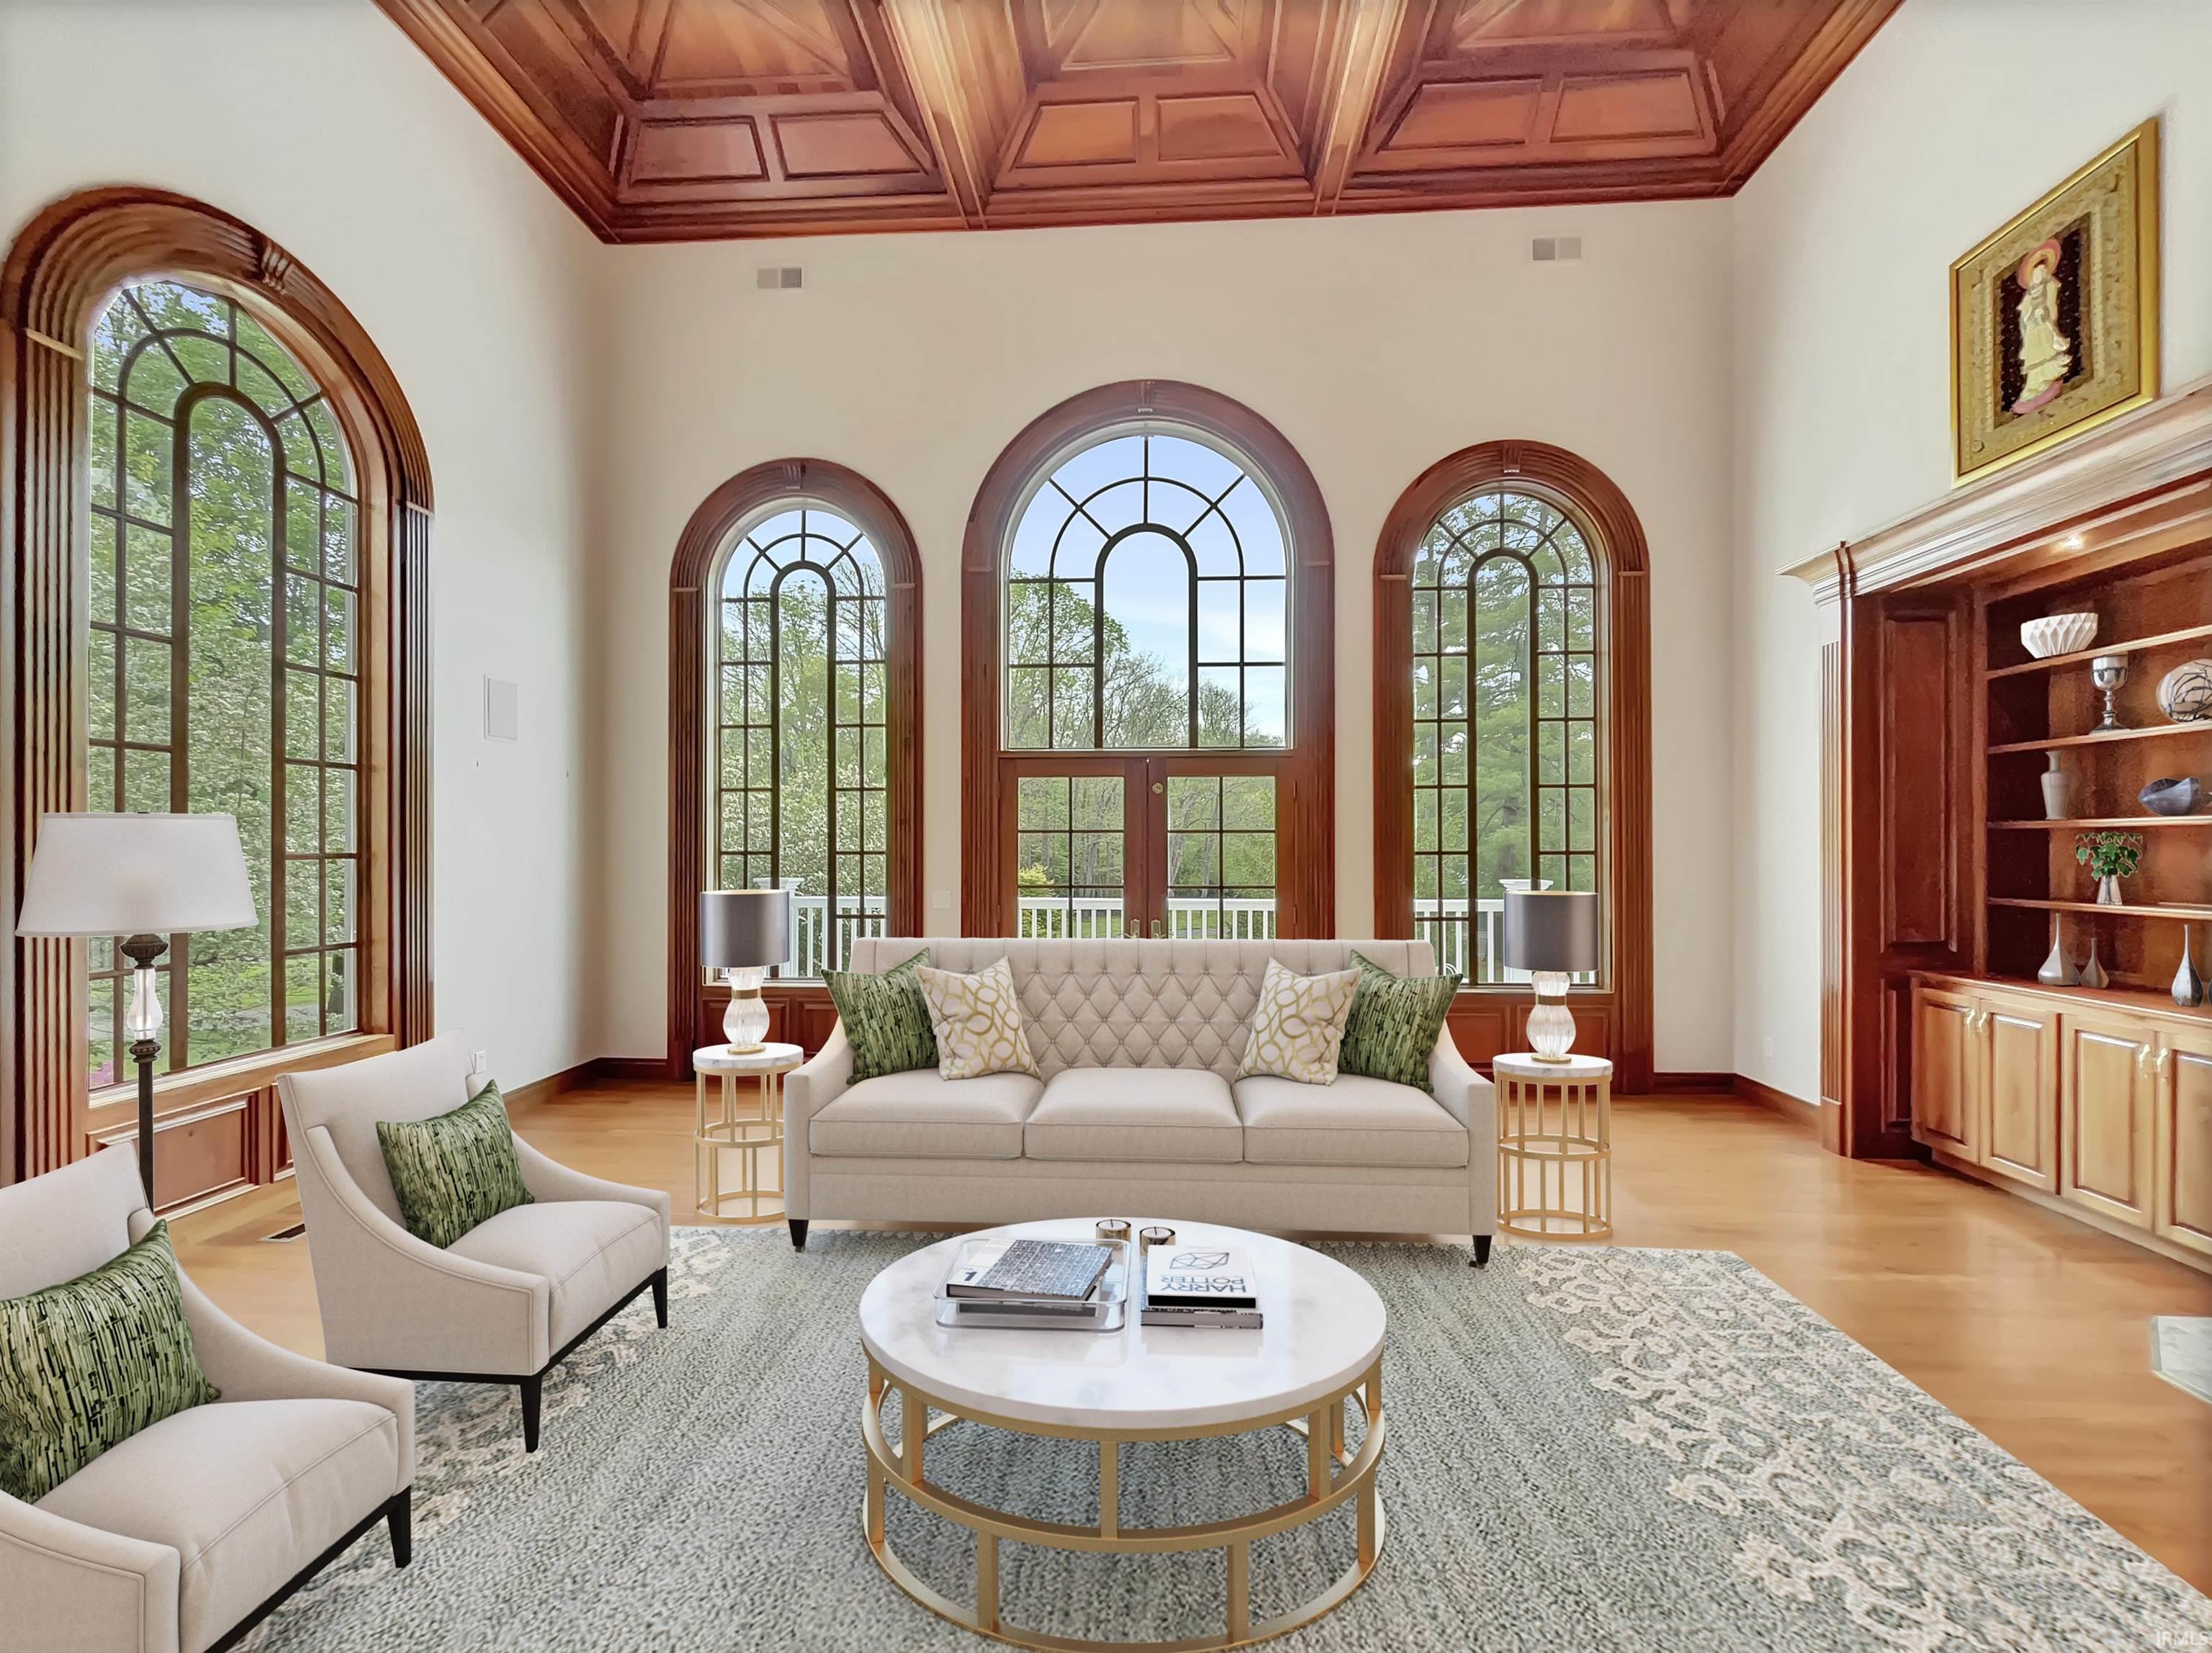 Intricate trim work and large rooms